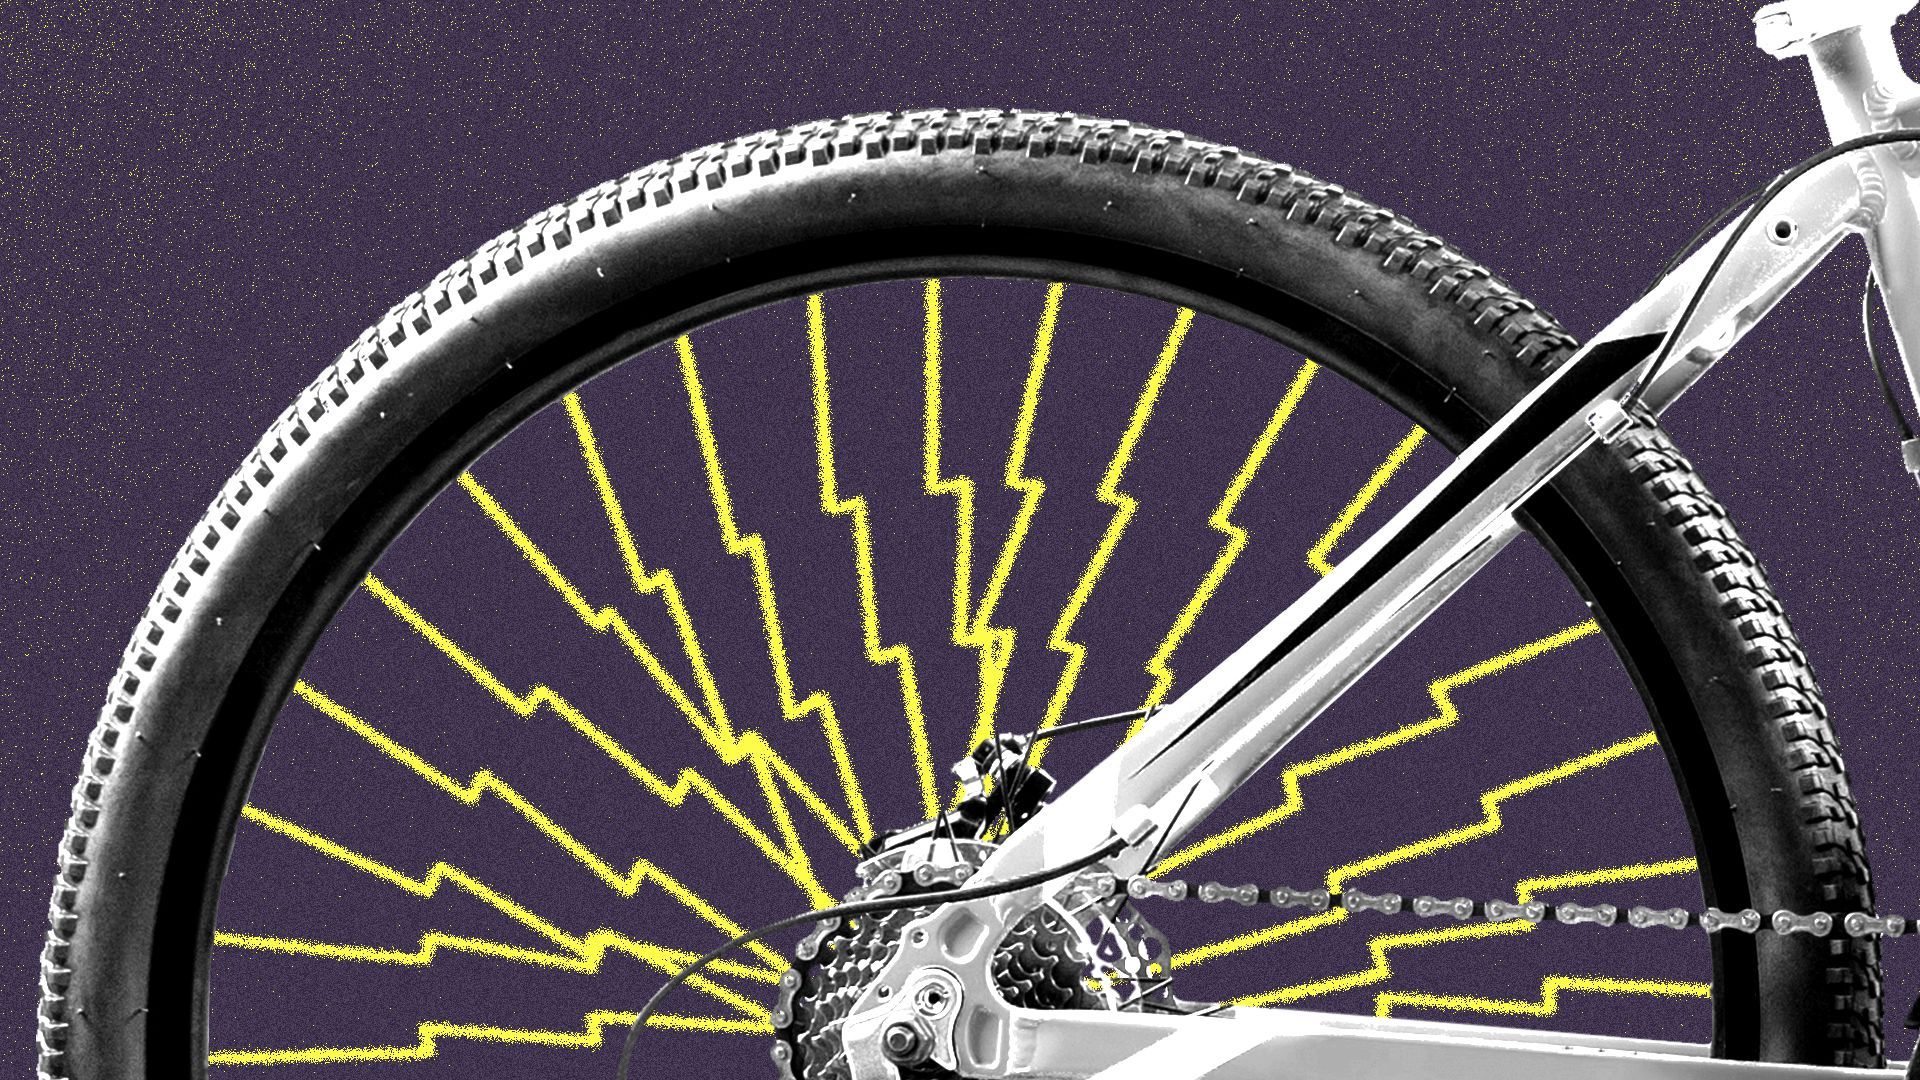 Illustration of a rear bike wheel with lightning bolts for spokes.